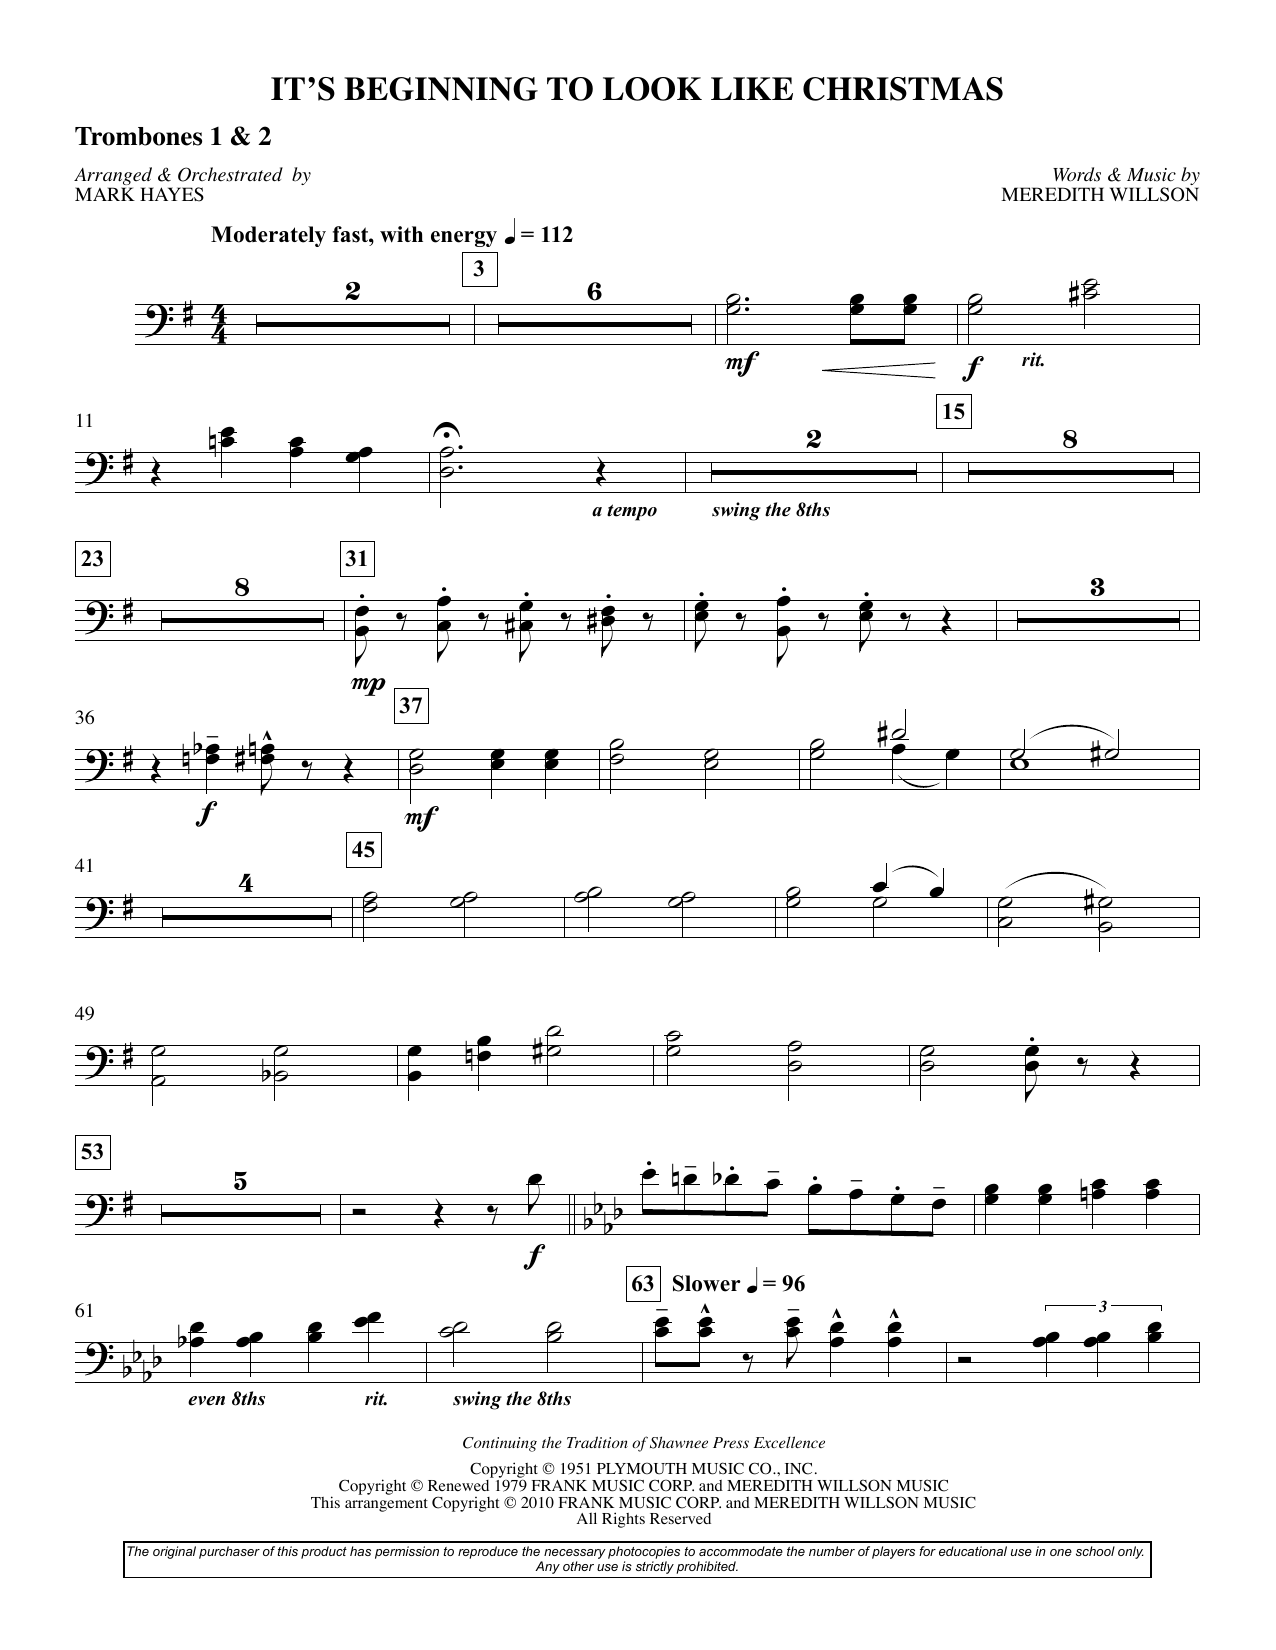 Meredith Willson It's Beginning To Look Like Christmas (arr. Mark Hayes) - Trombone 1,2 sheet music preview music notes and score for Choir Instrumental Pak including 2 page(s)